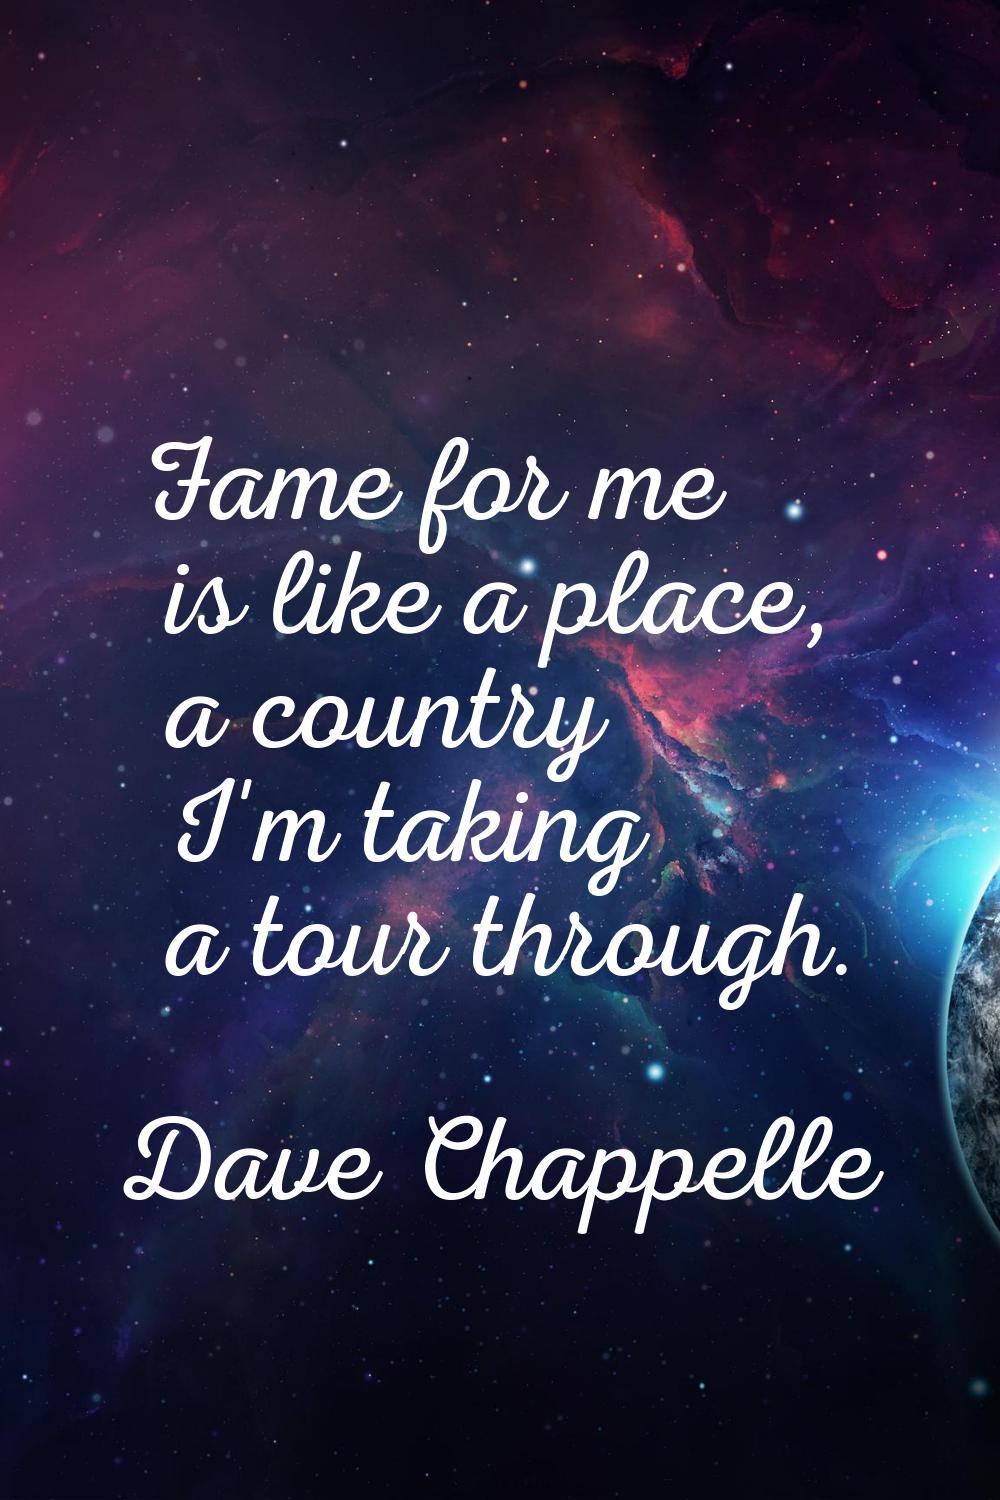 Fame for me is like a place, a country I'm taking a tour through.